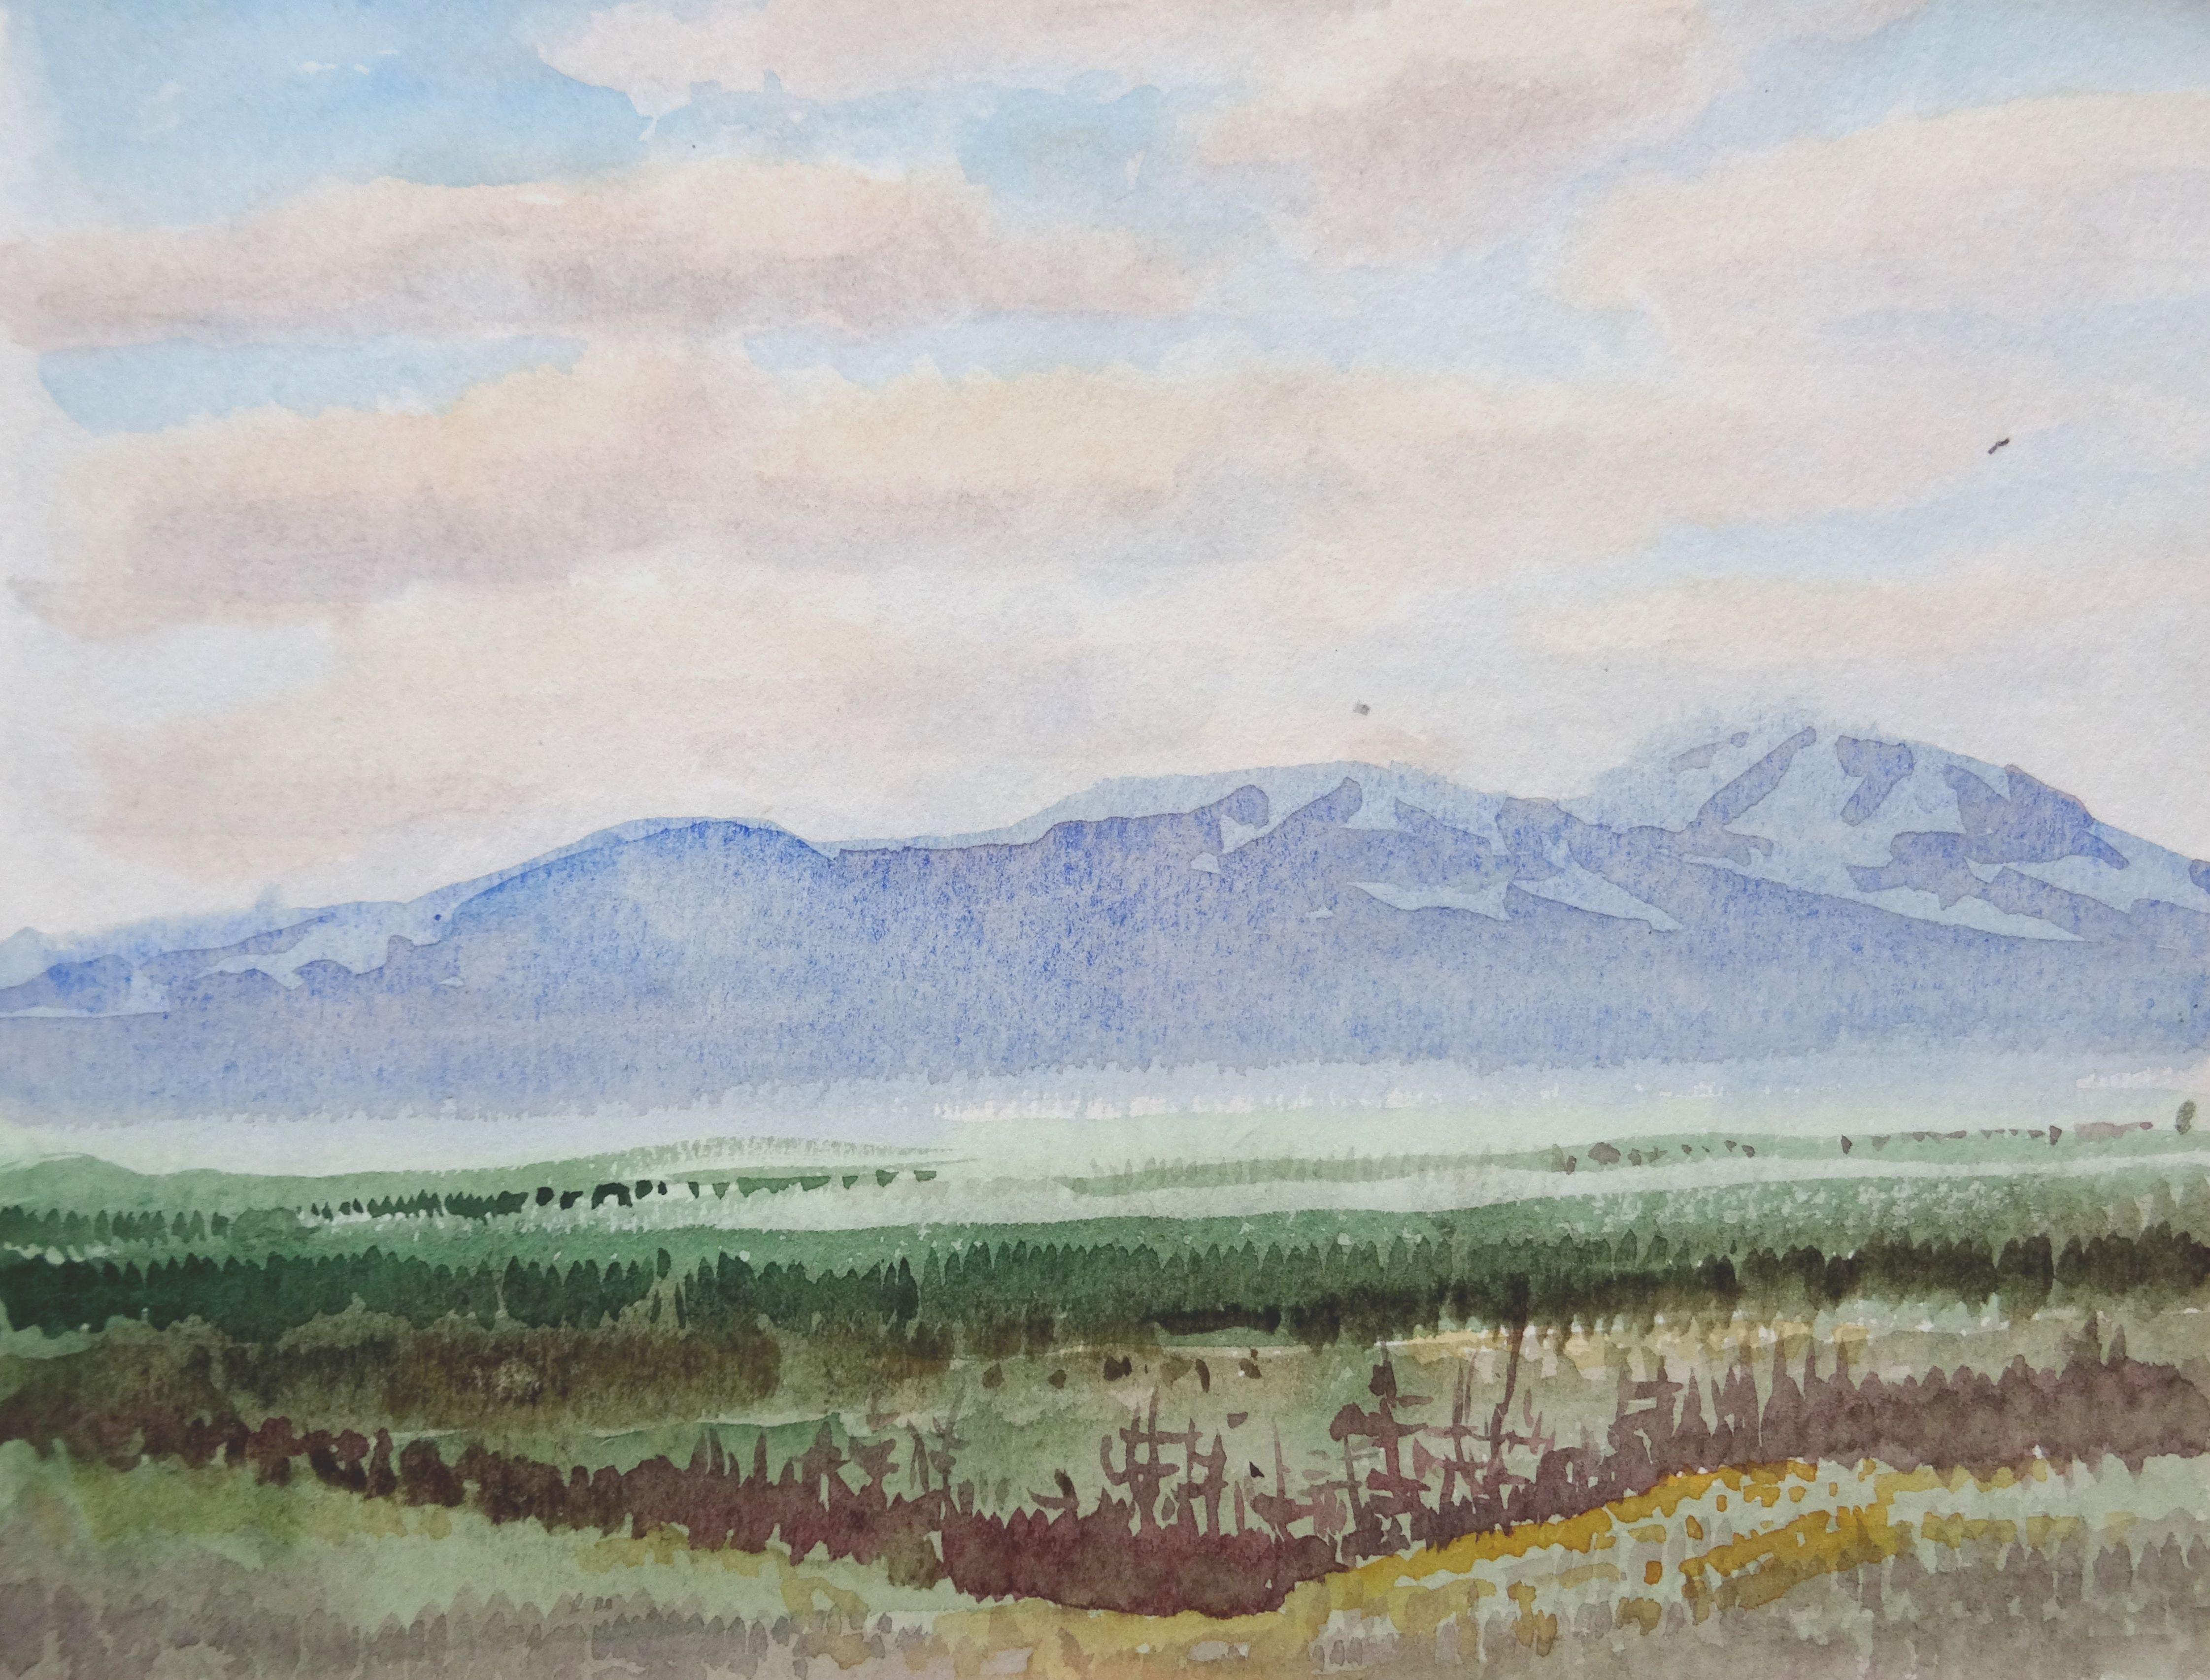 Blue mountain. 1975. Watercolor on paper, 14x19 cm